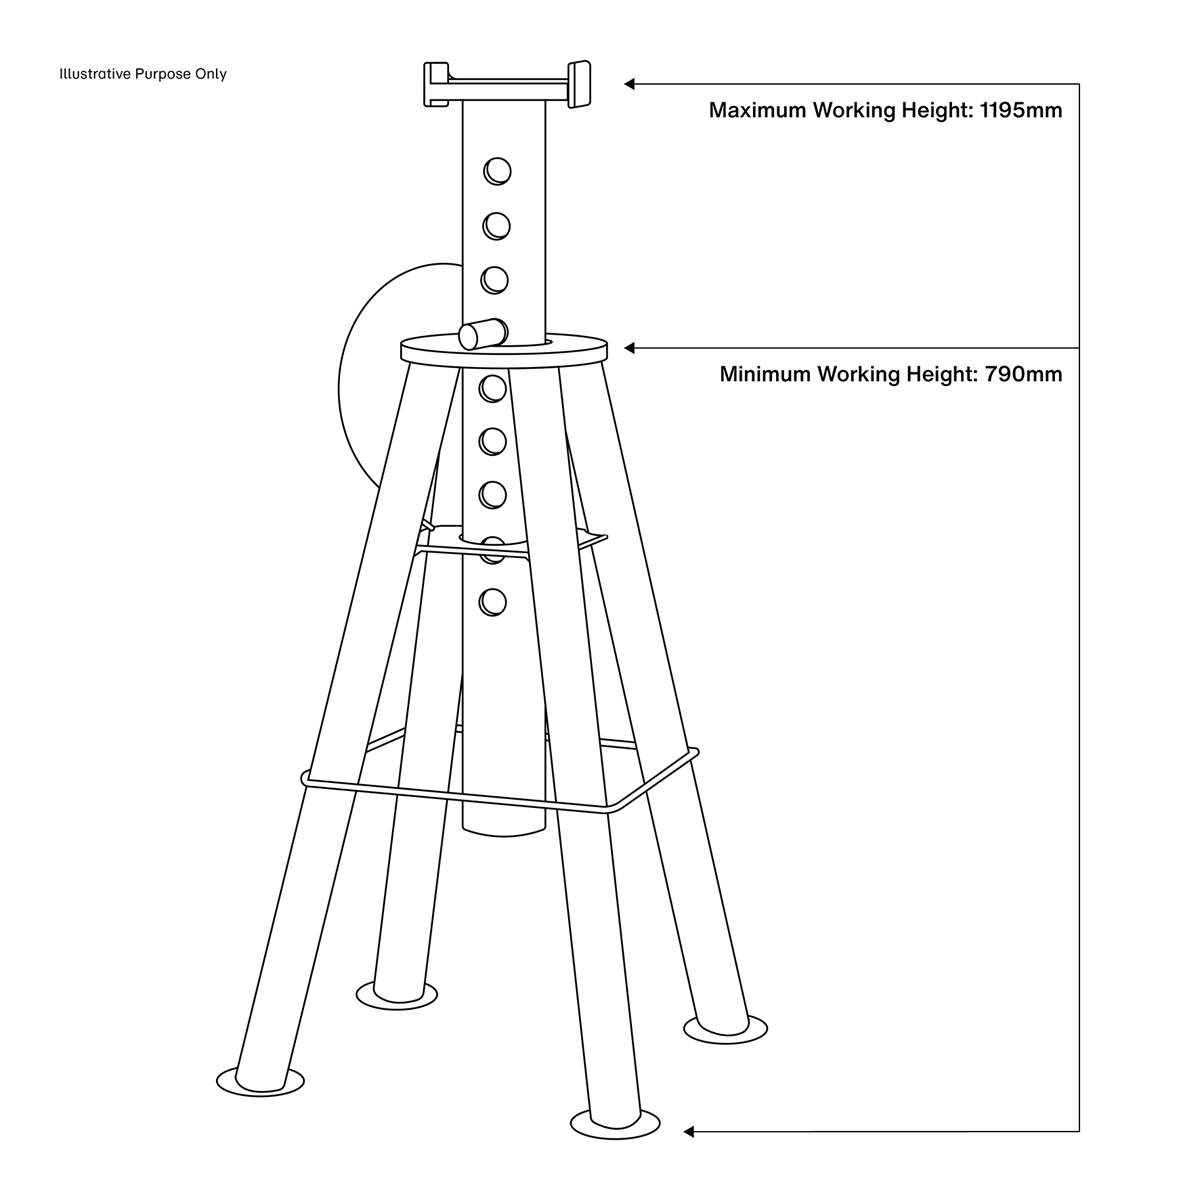 Sealey High Level 10 Tonne Capacity Axle Stands AS10H diagram